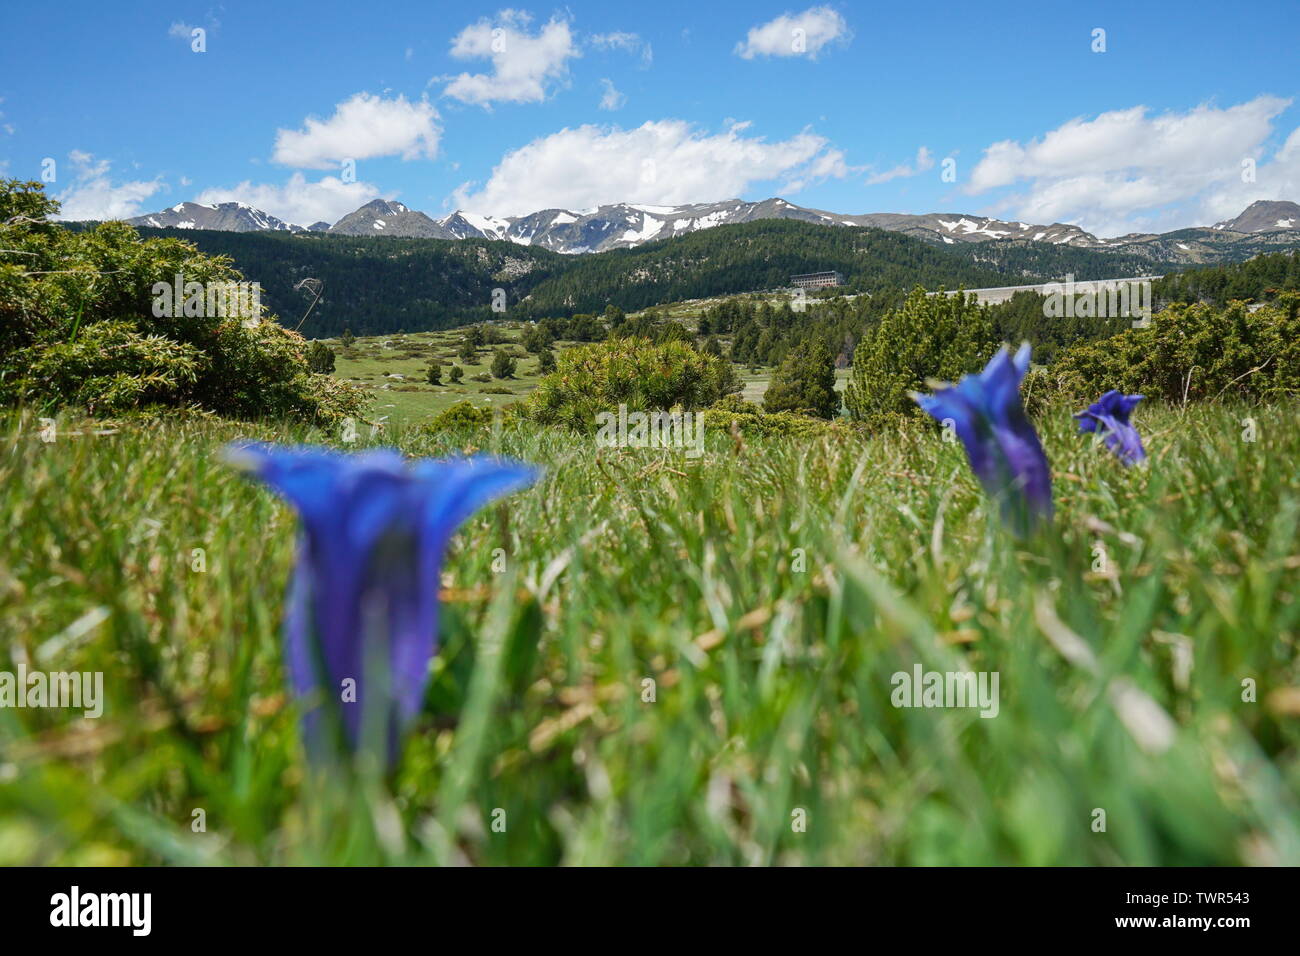 Mountain landscape meadow with blue flowers in foreground, France, Pyrenees-Orientales, natural park of the Catalan Pyrenees Stock Photo